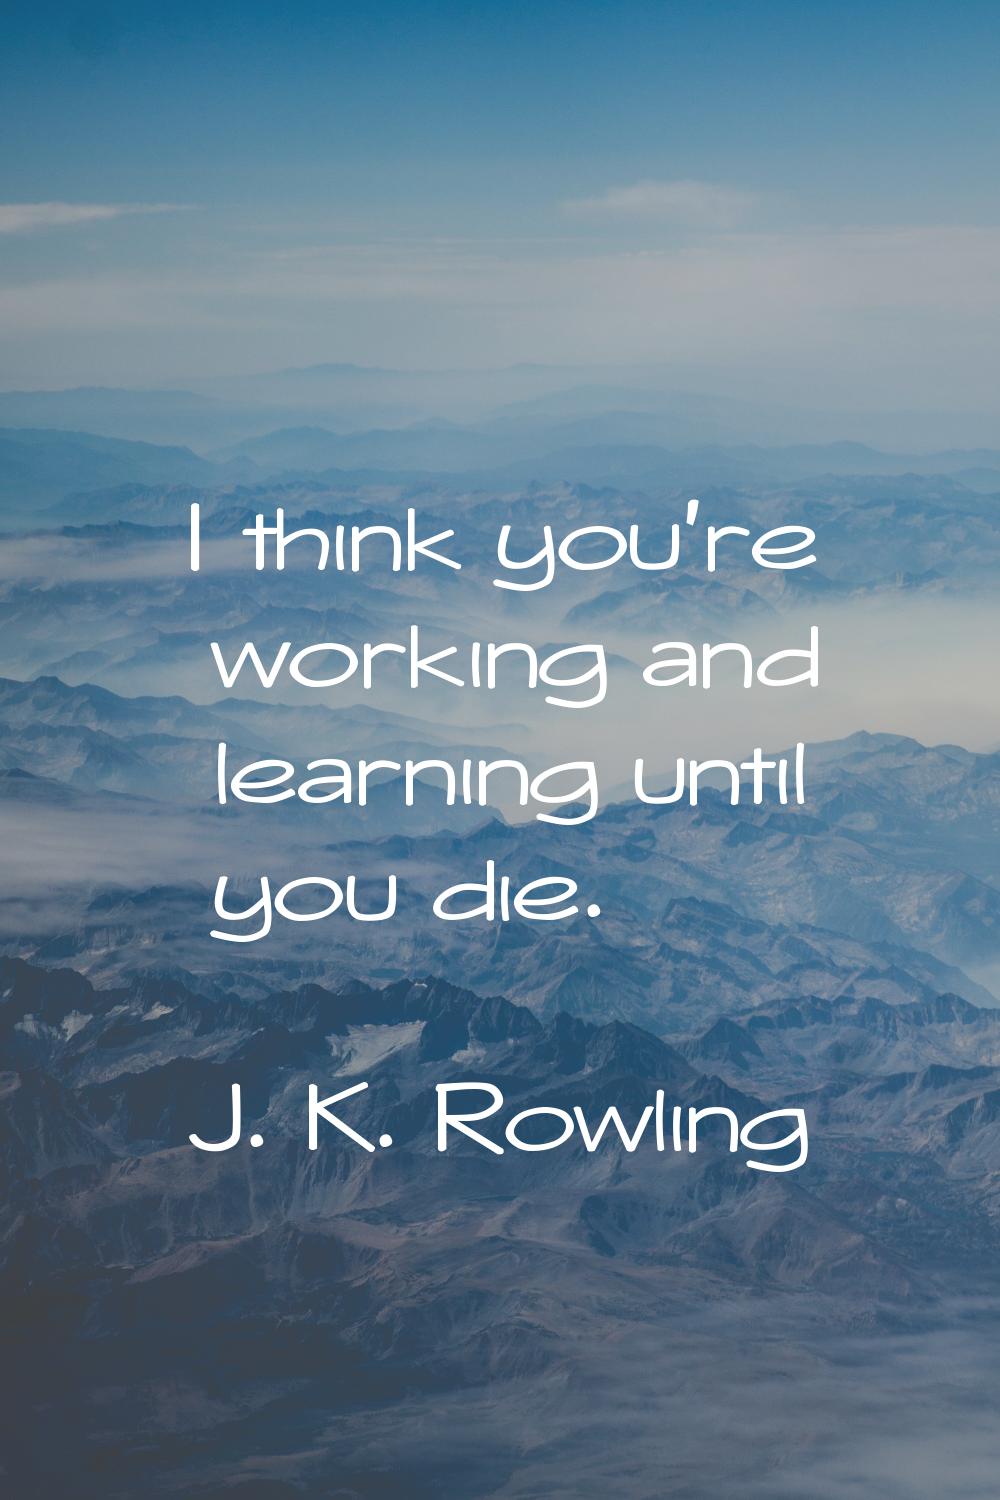 I think you're working and learning until you die.